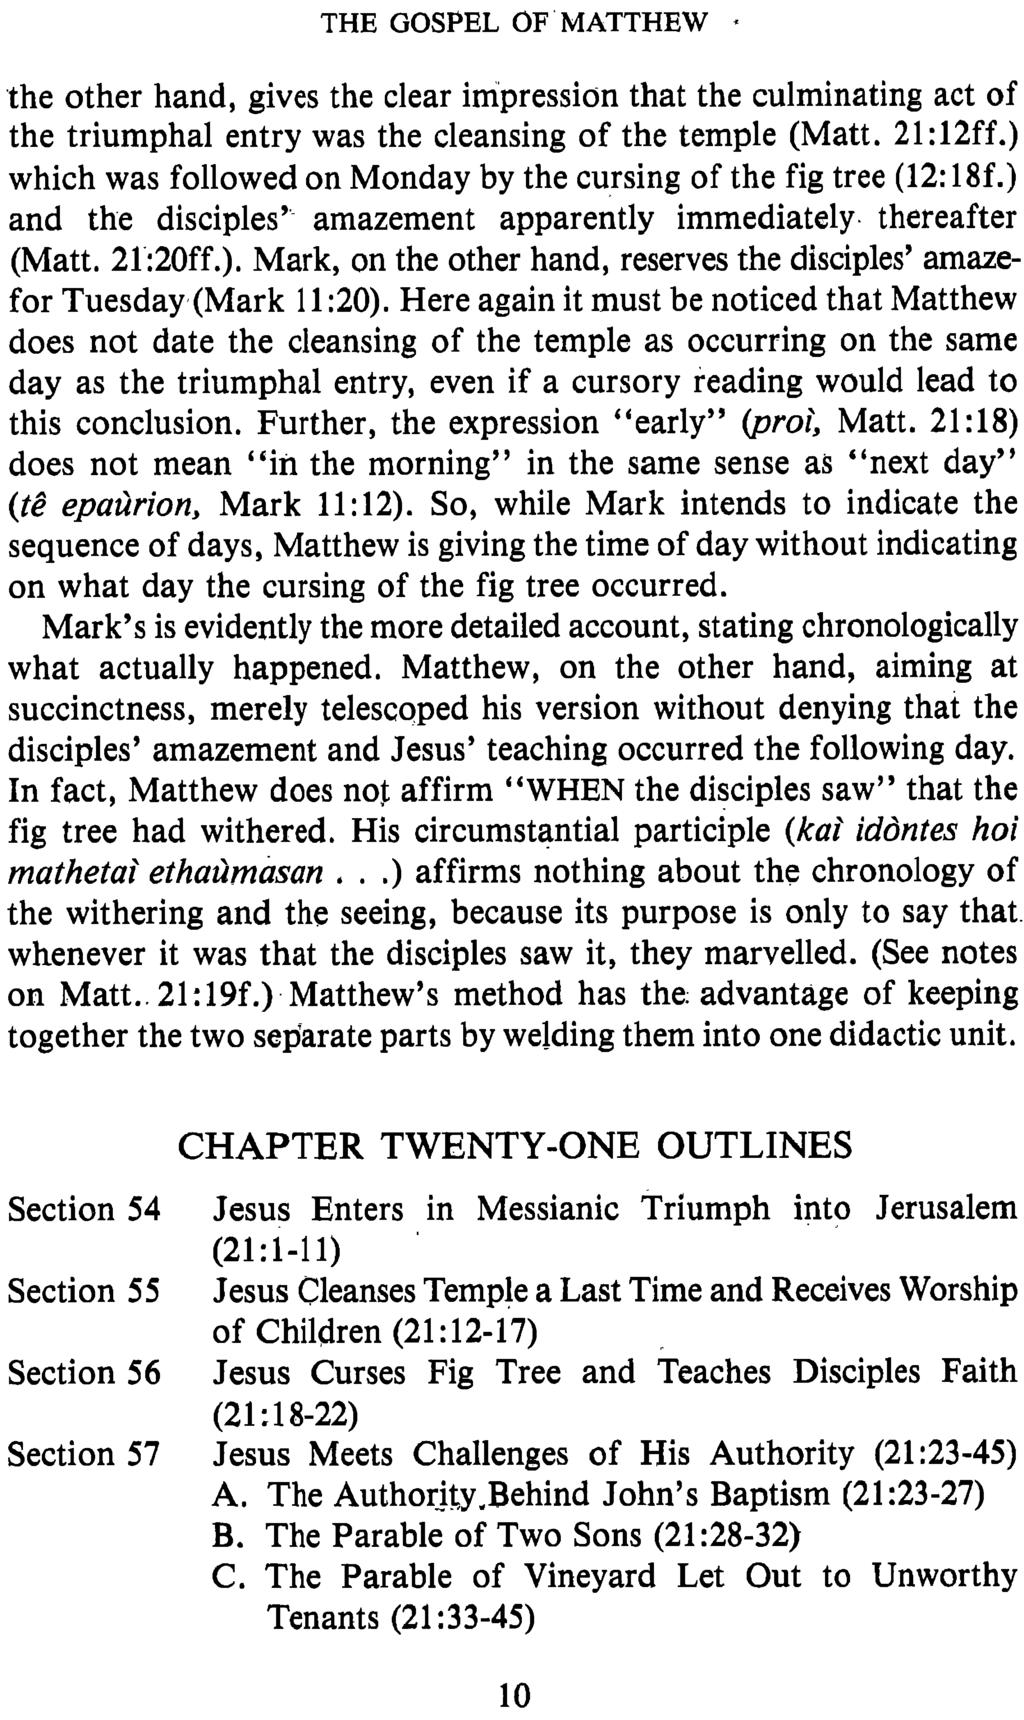 THE GOSPEL OF MATTHEW * the other hand, gives the clear impression that the culminating act of the triumphal entry was the cleansing of the temple (Matt. 21:12ff.